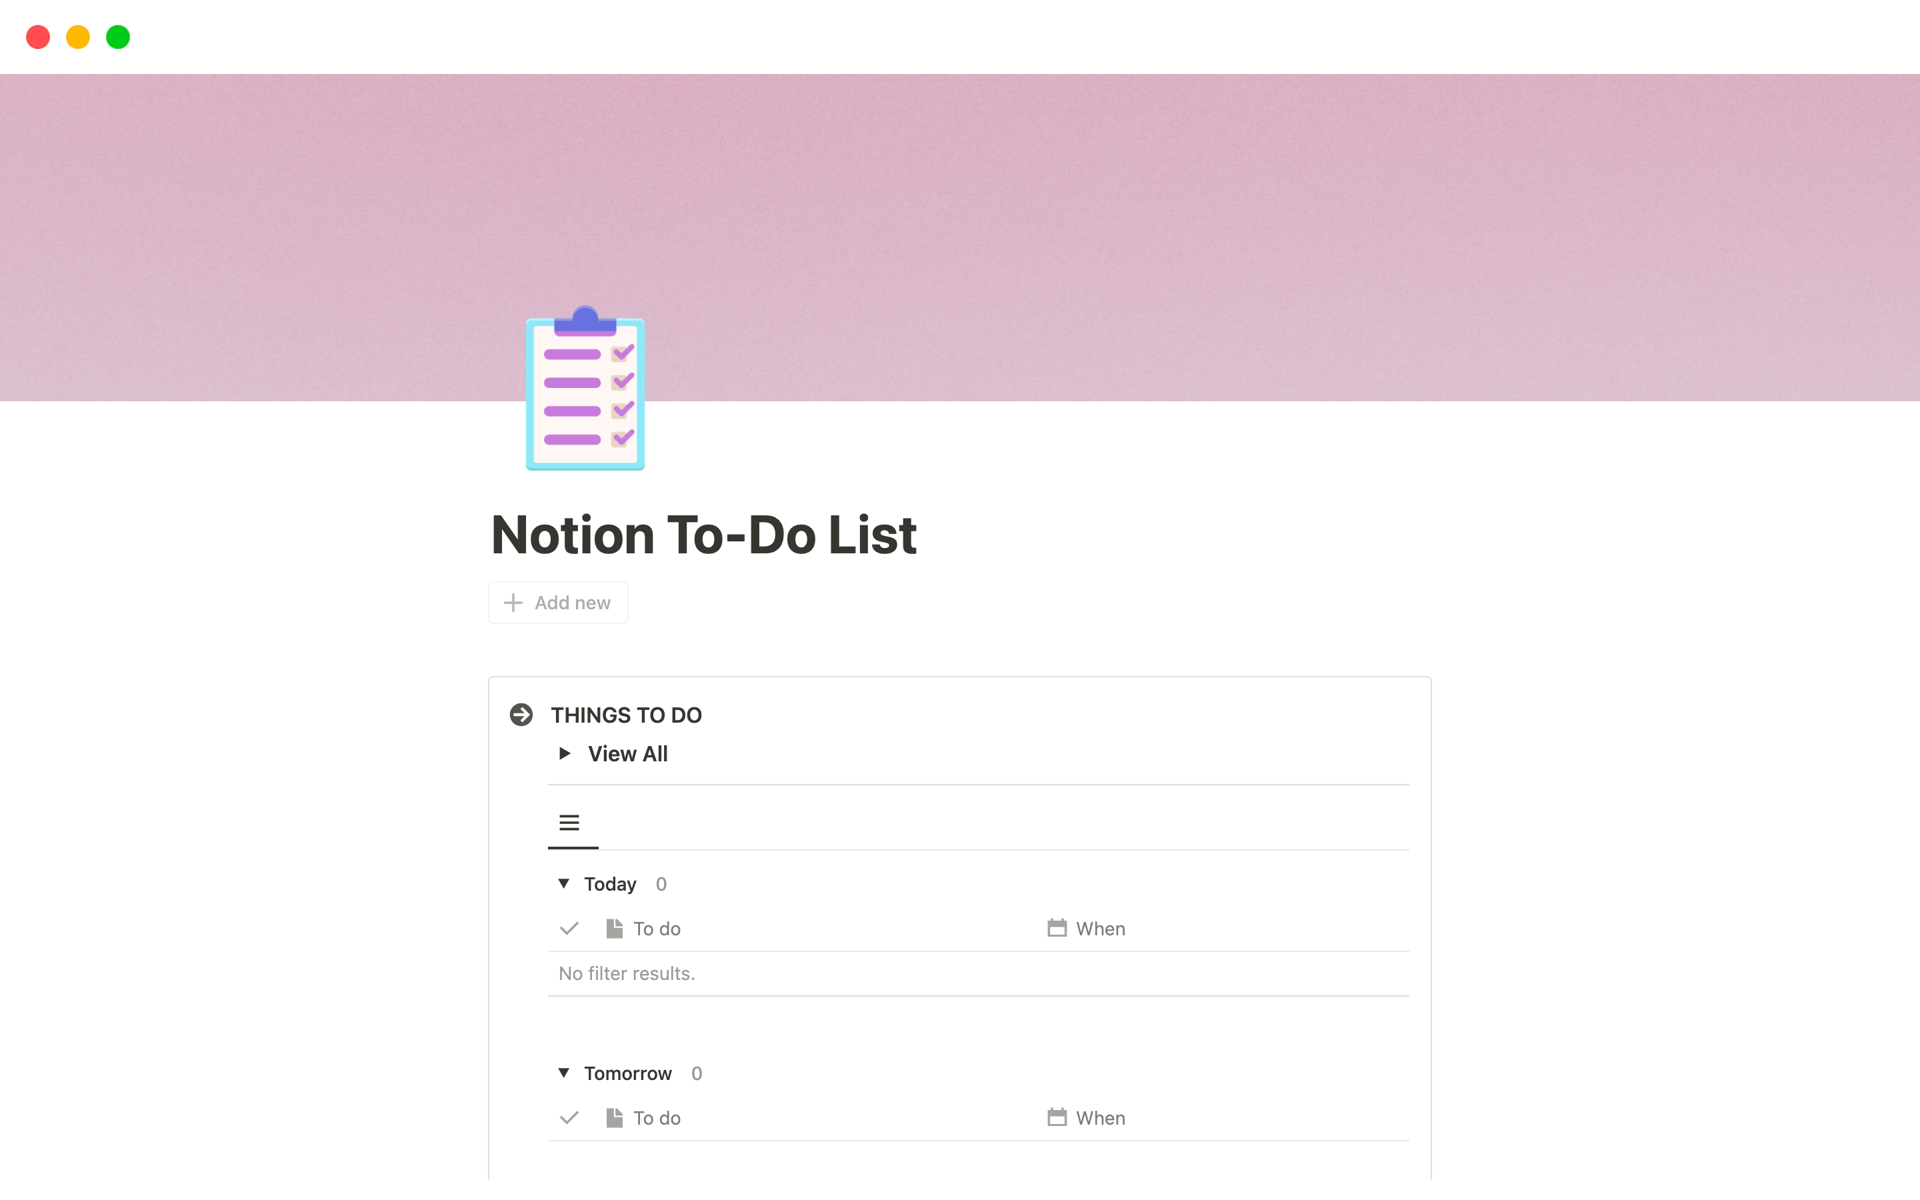 A template preview for To-Do List